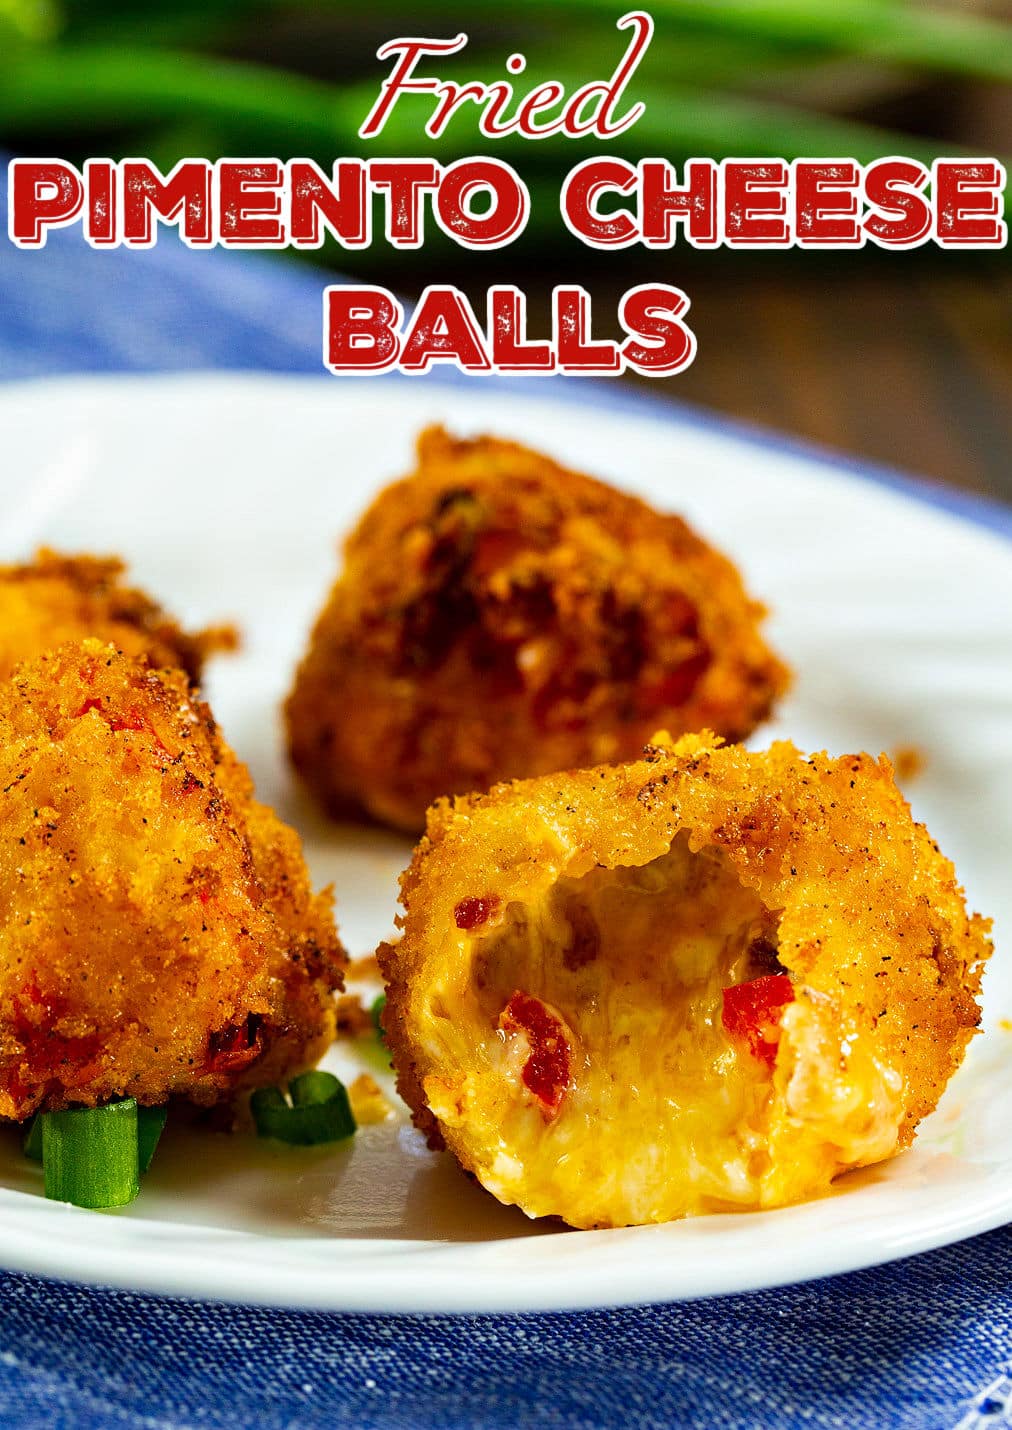 Fried Pimento Cheese Balls on a plate. One with a bite taken.